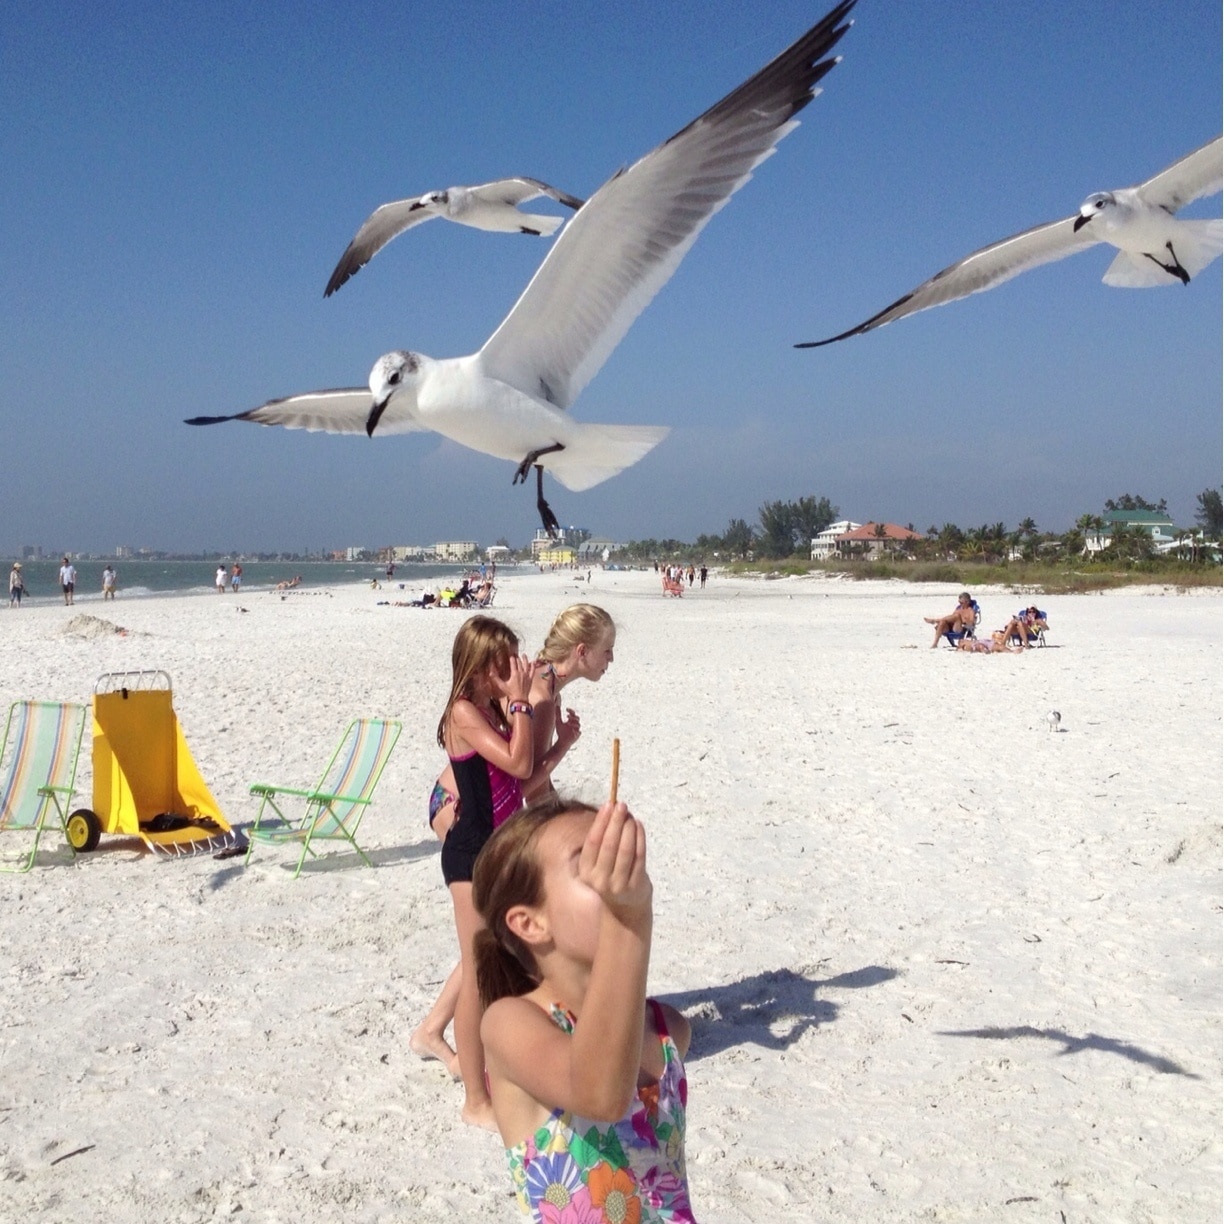 #kidsfun I wouldn't say feed the seagulls but there are so many nice restaurants and beach shops.